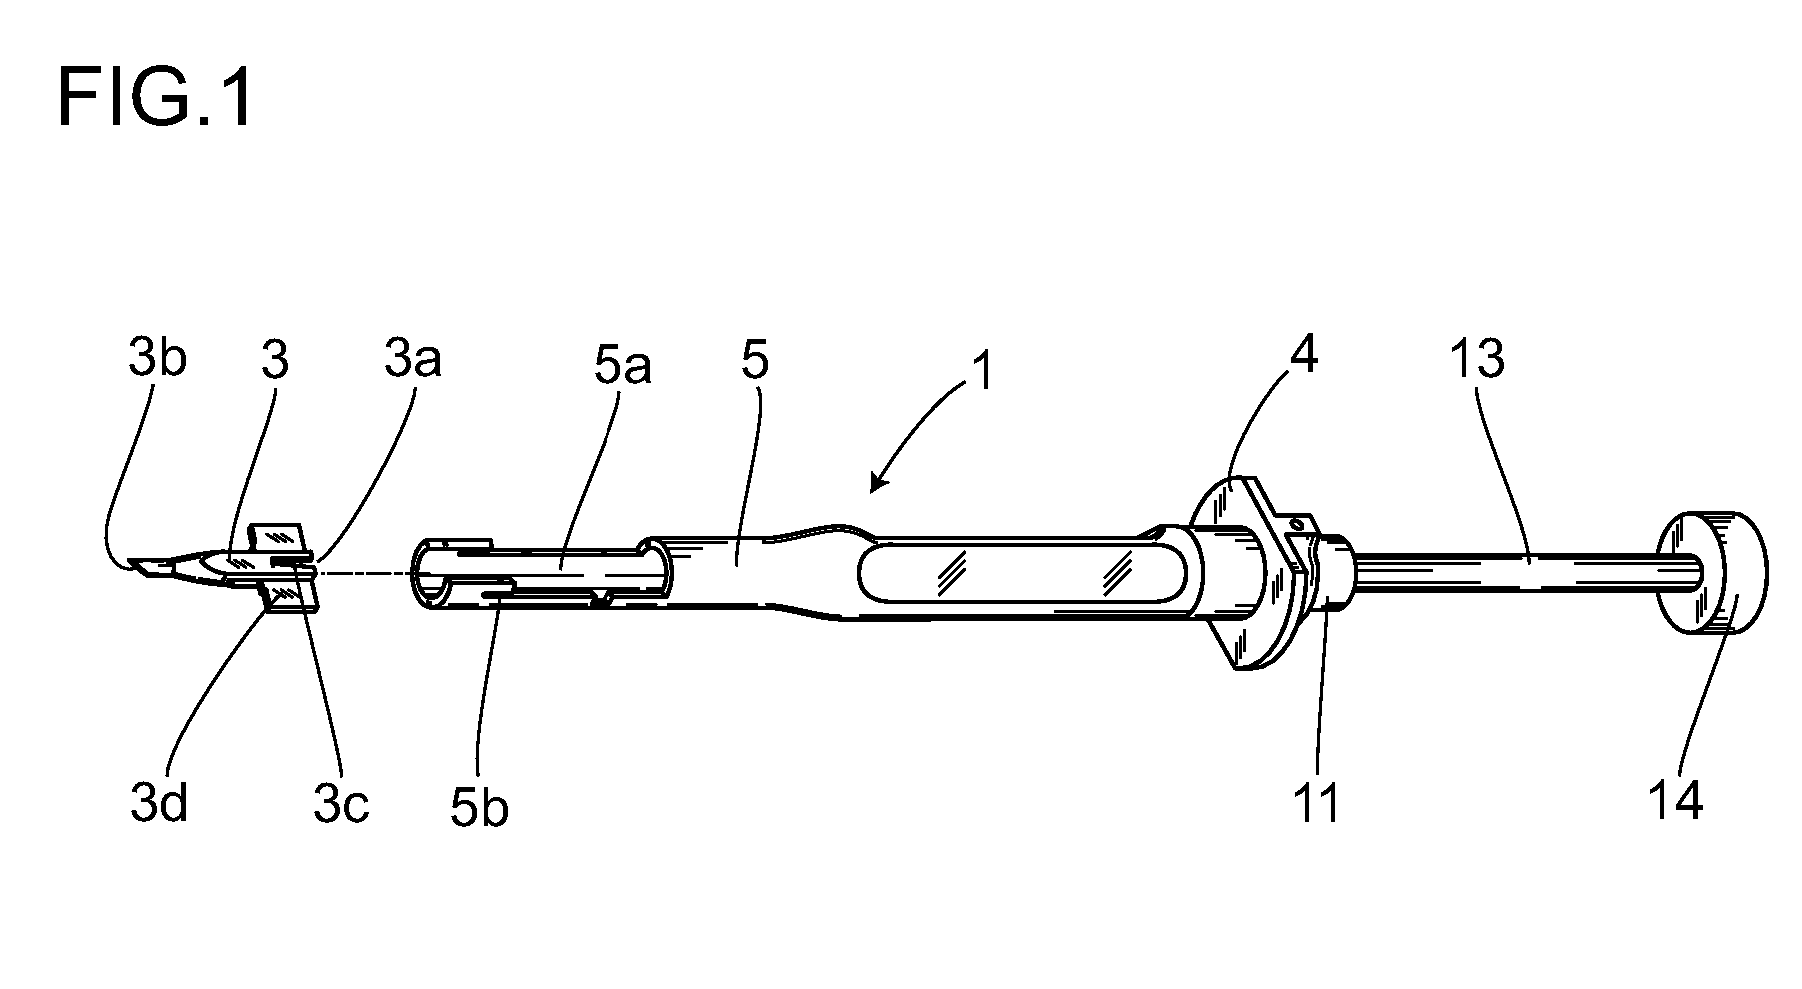 Intraocular lens implanting device